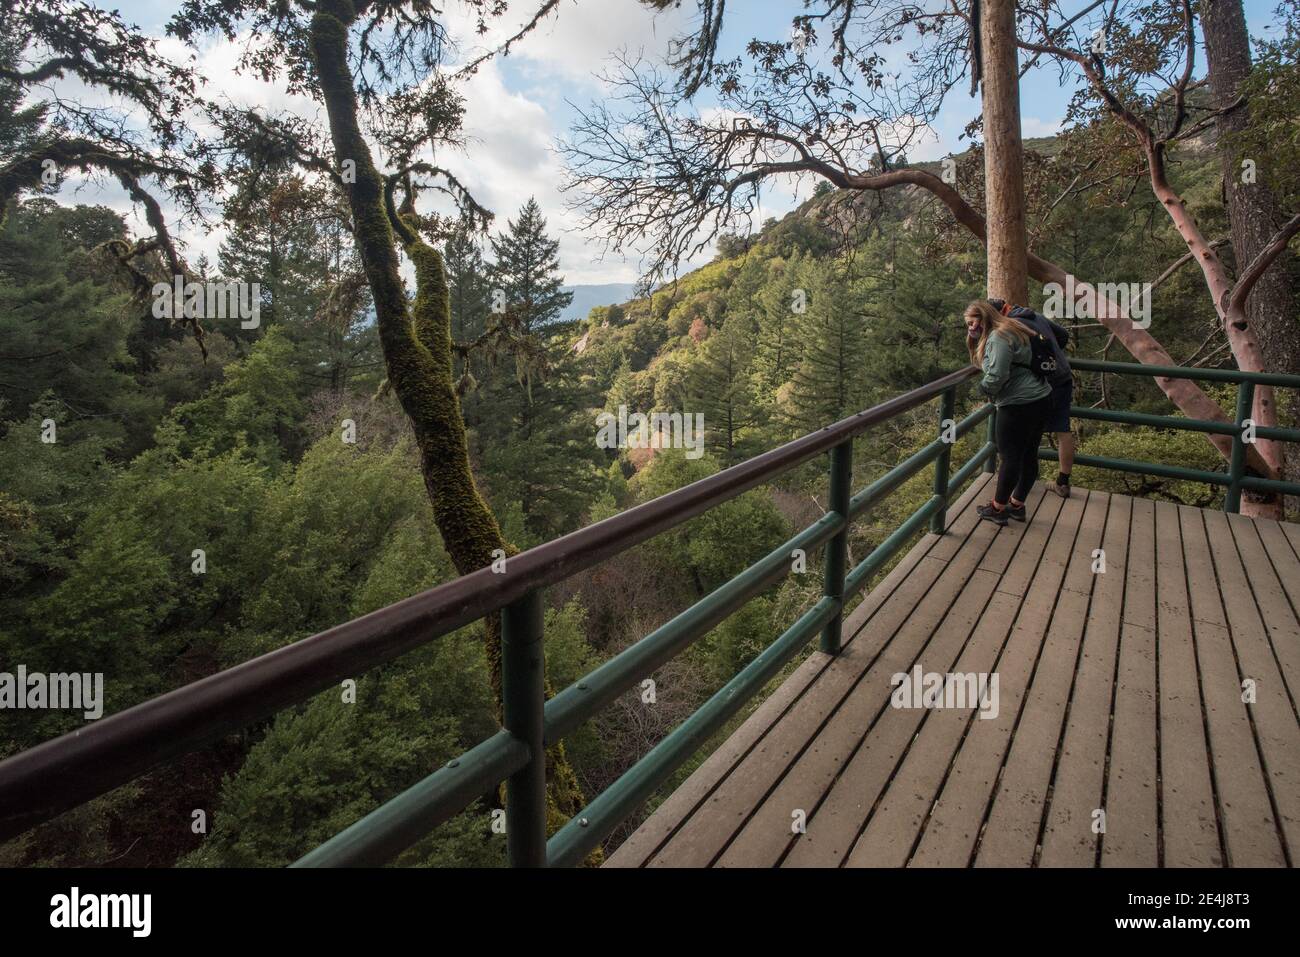 A observation platform in Castle rock state park allows visitors to safely look over a valley below while not worrying about the steep dropoff. Stock Photo